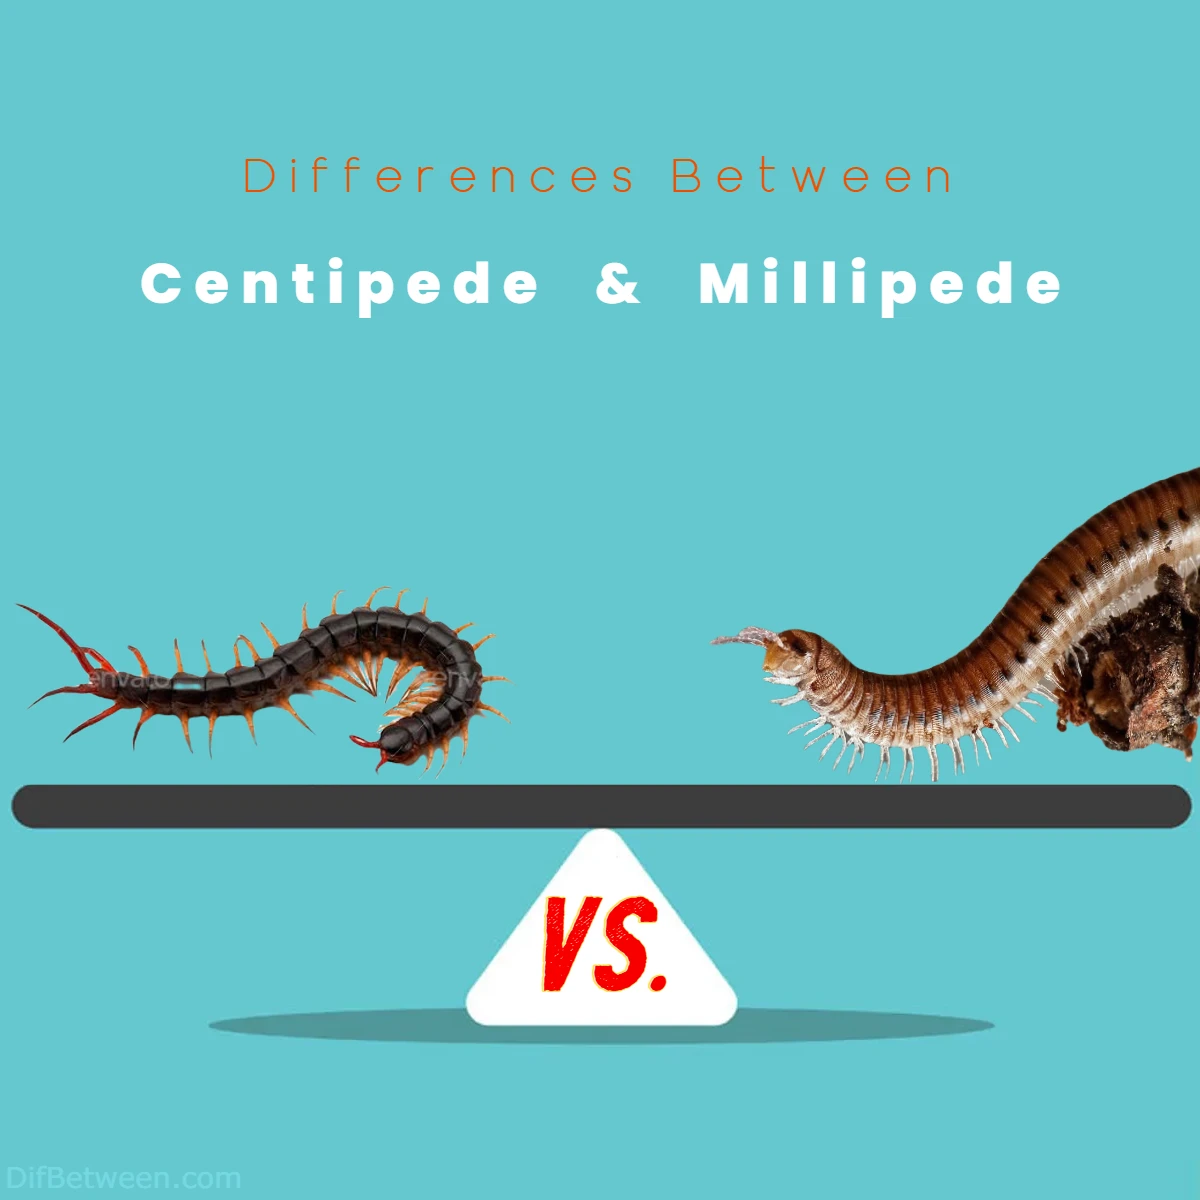 Differences Between Centipede vs Millipede